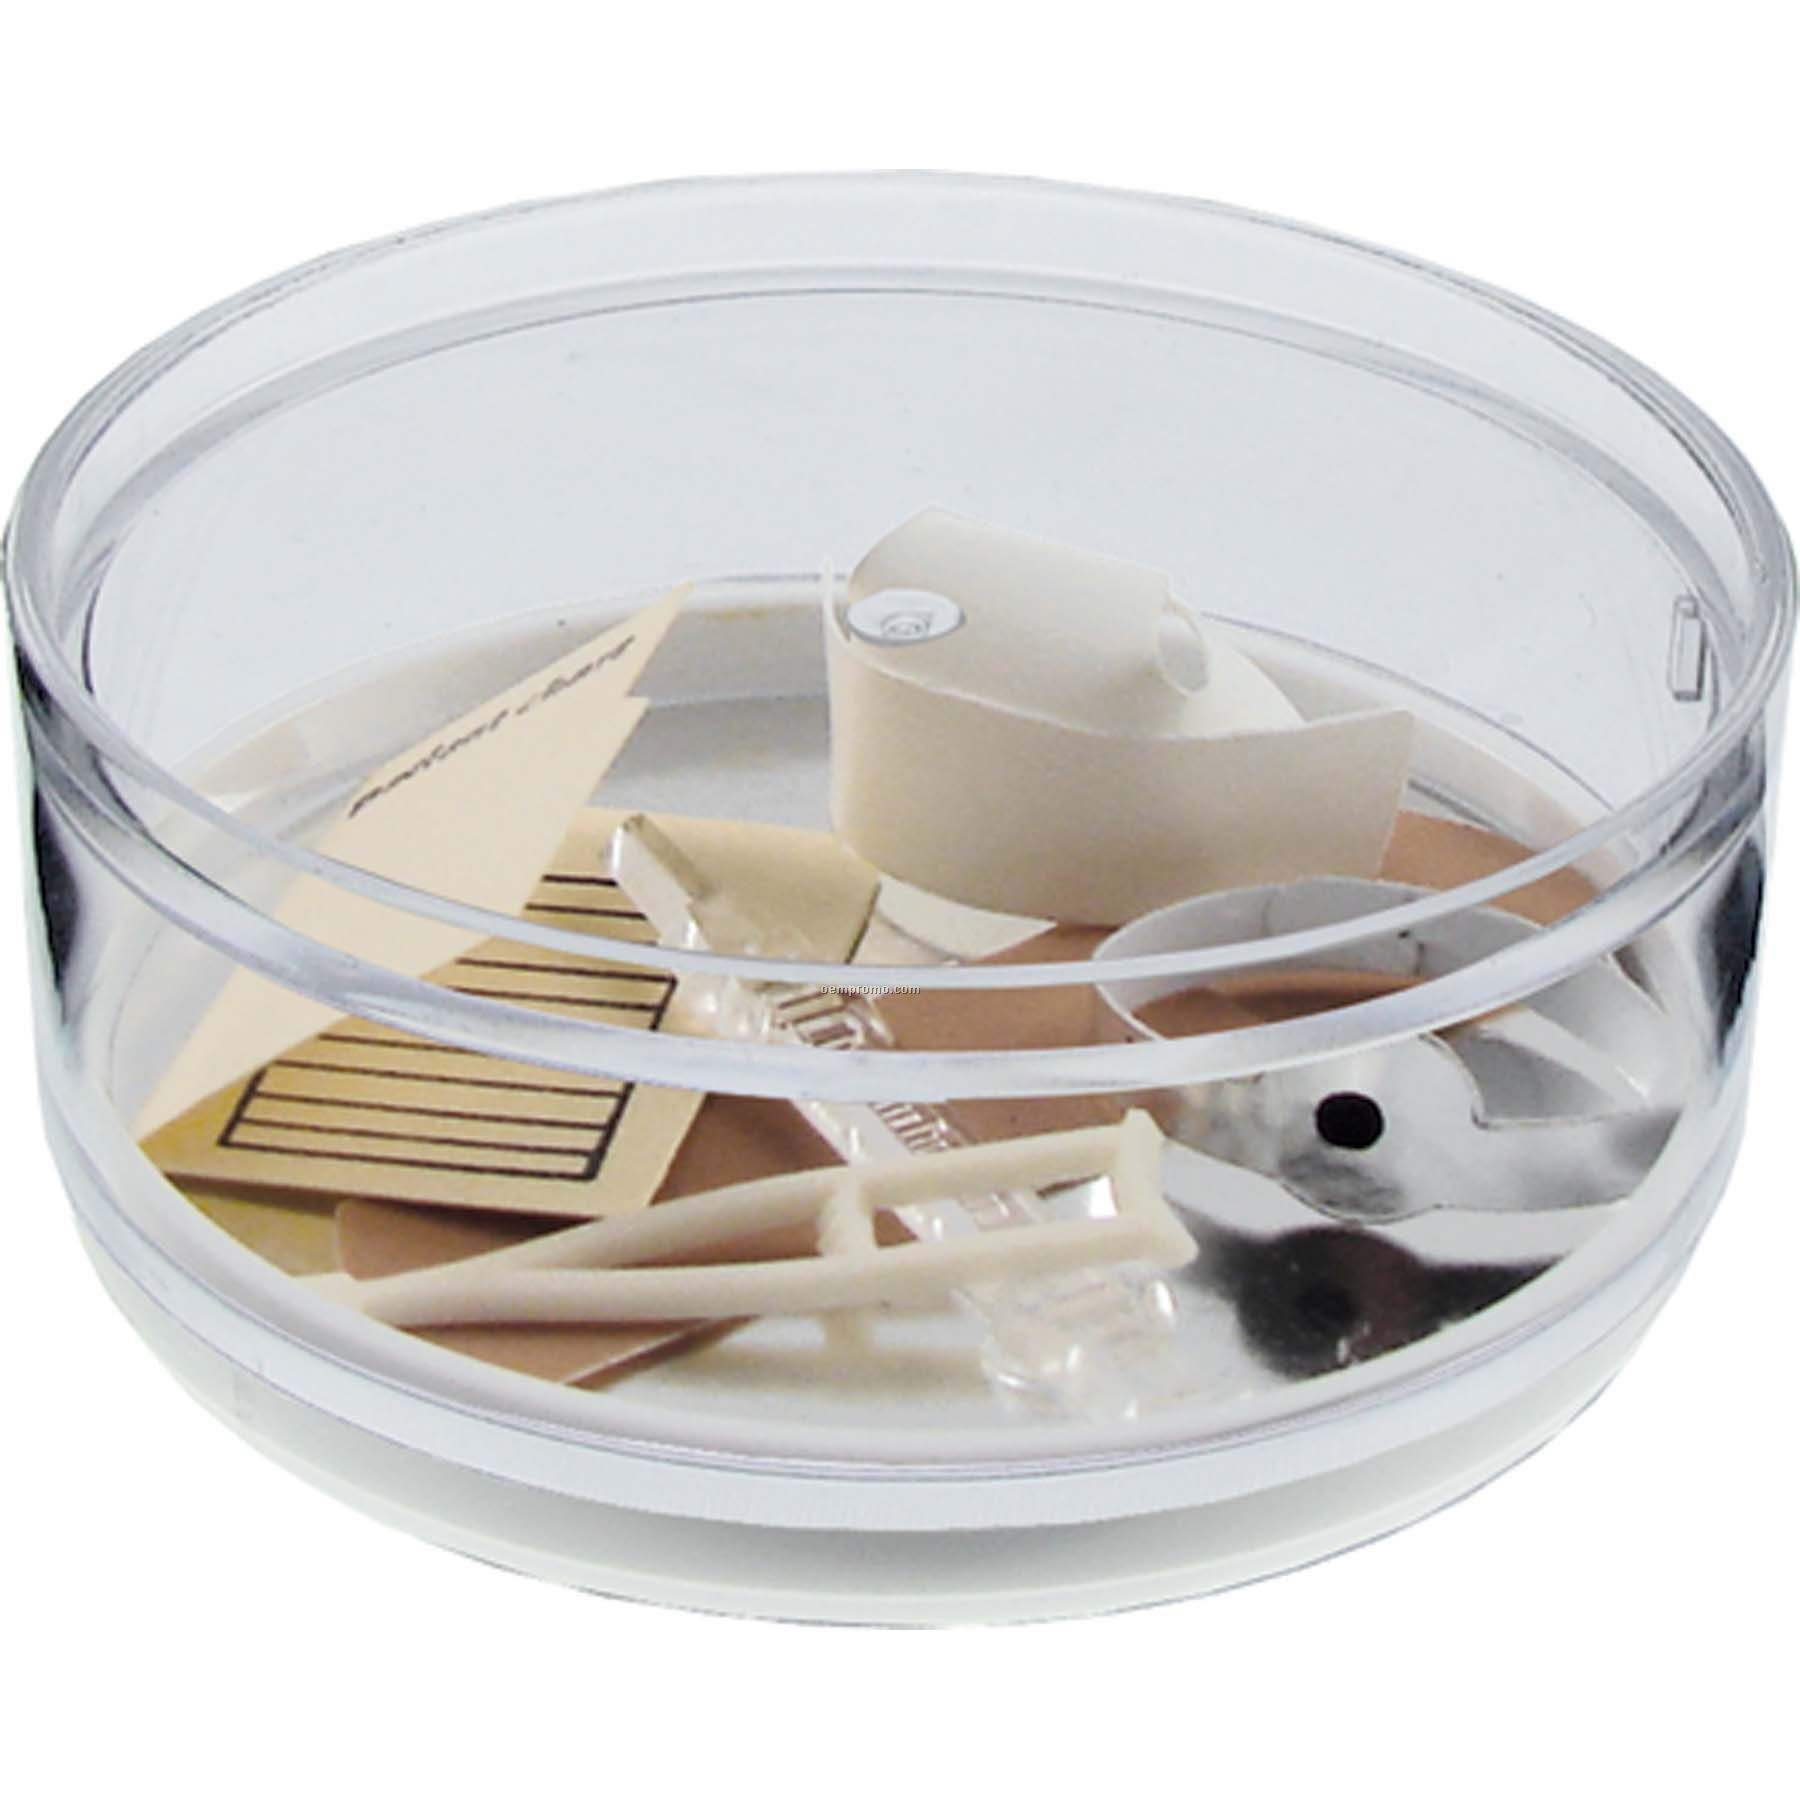 House Call Compartment Coaster Caddy